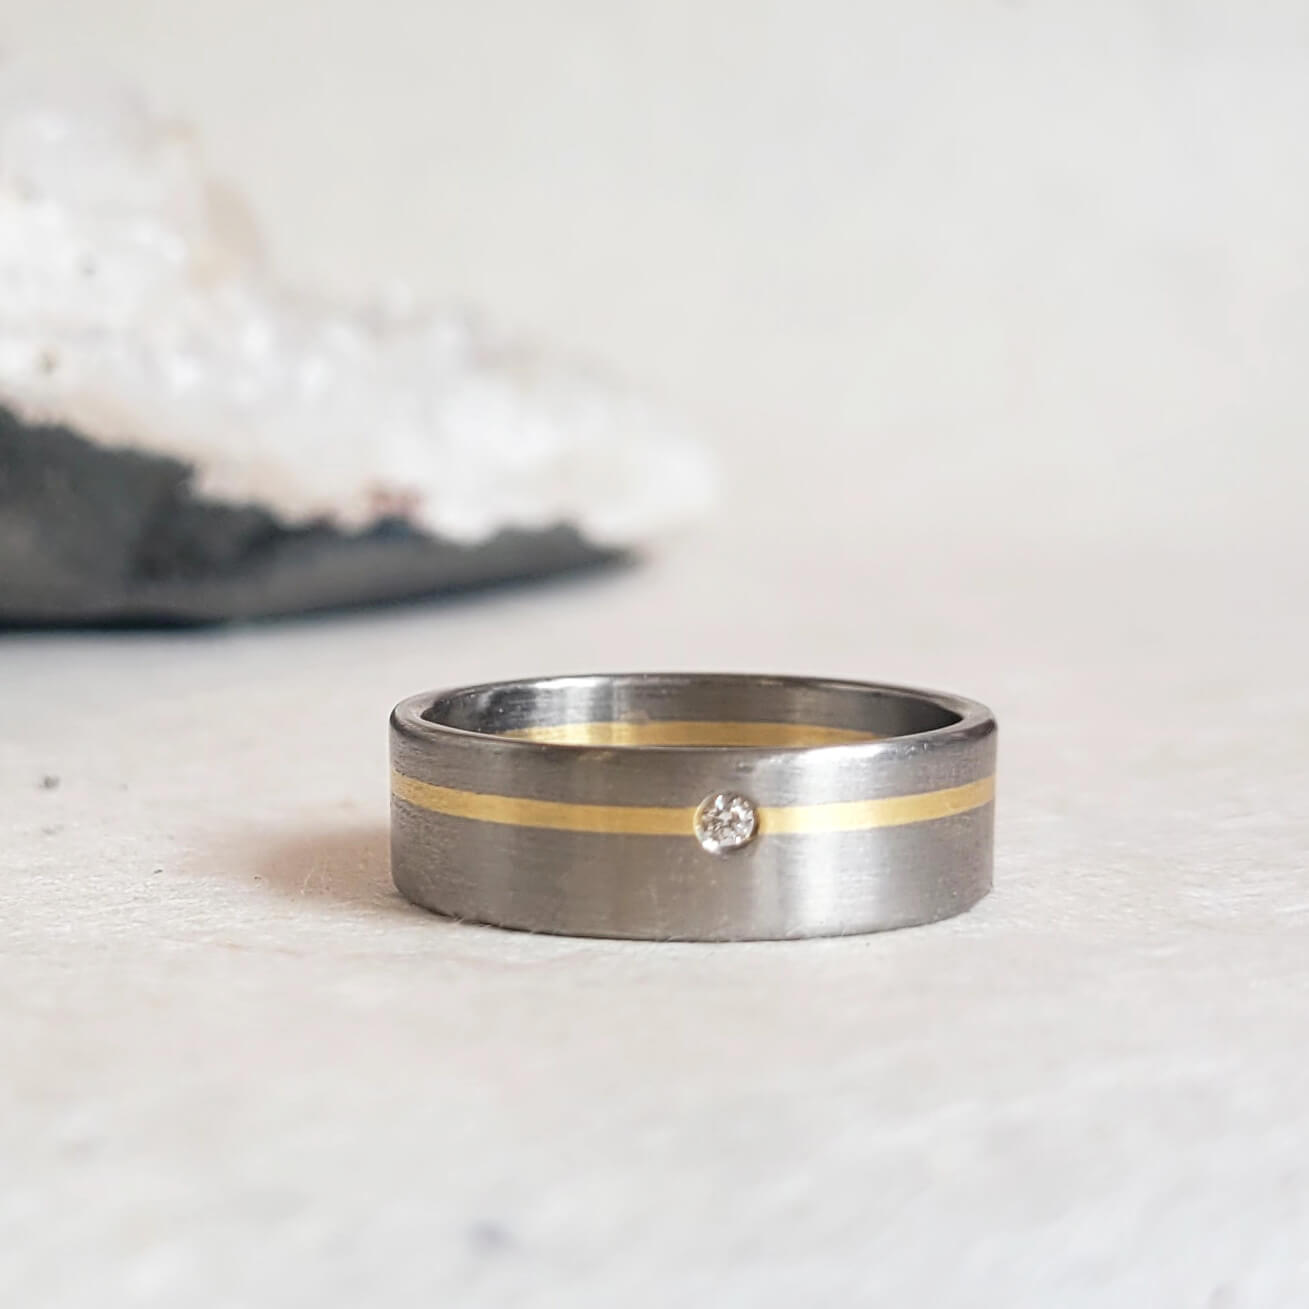 7mm Satin Band of Palladium and Yellow Gold with Diamond Accent